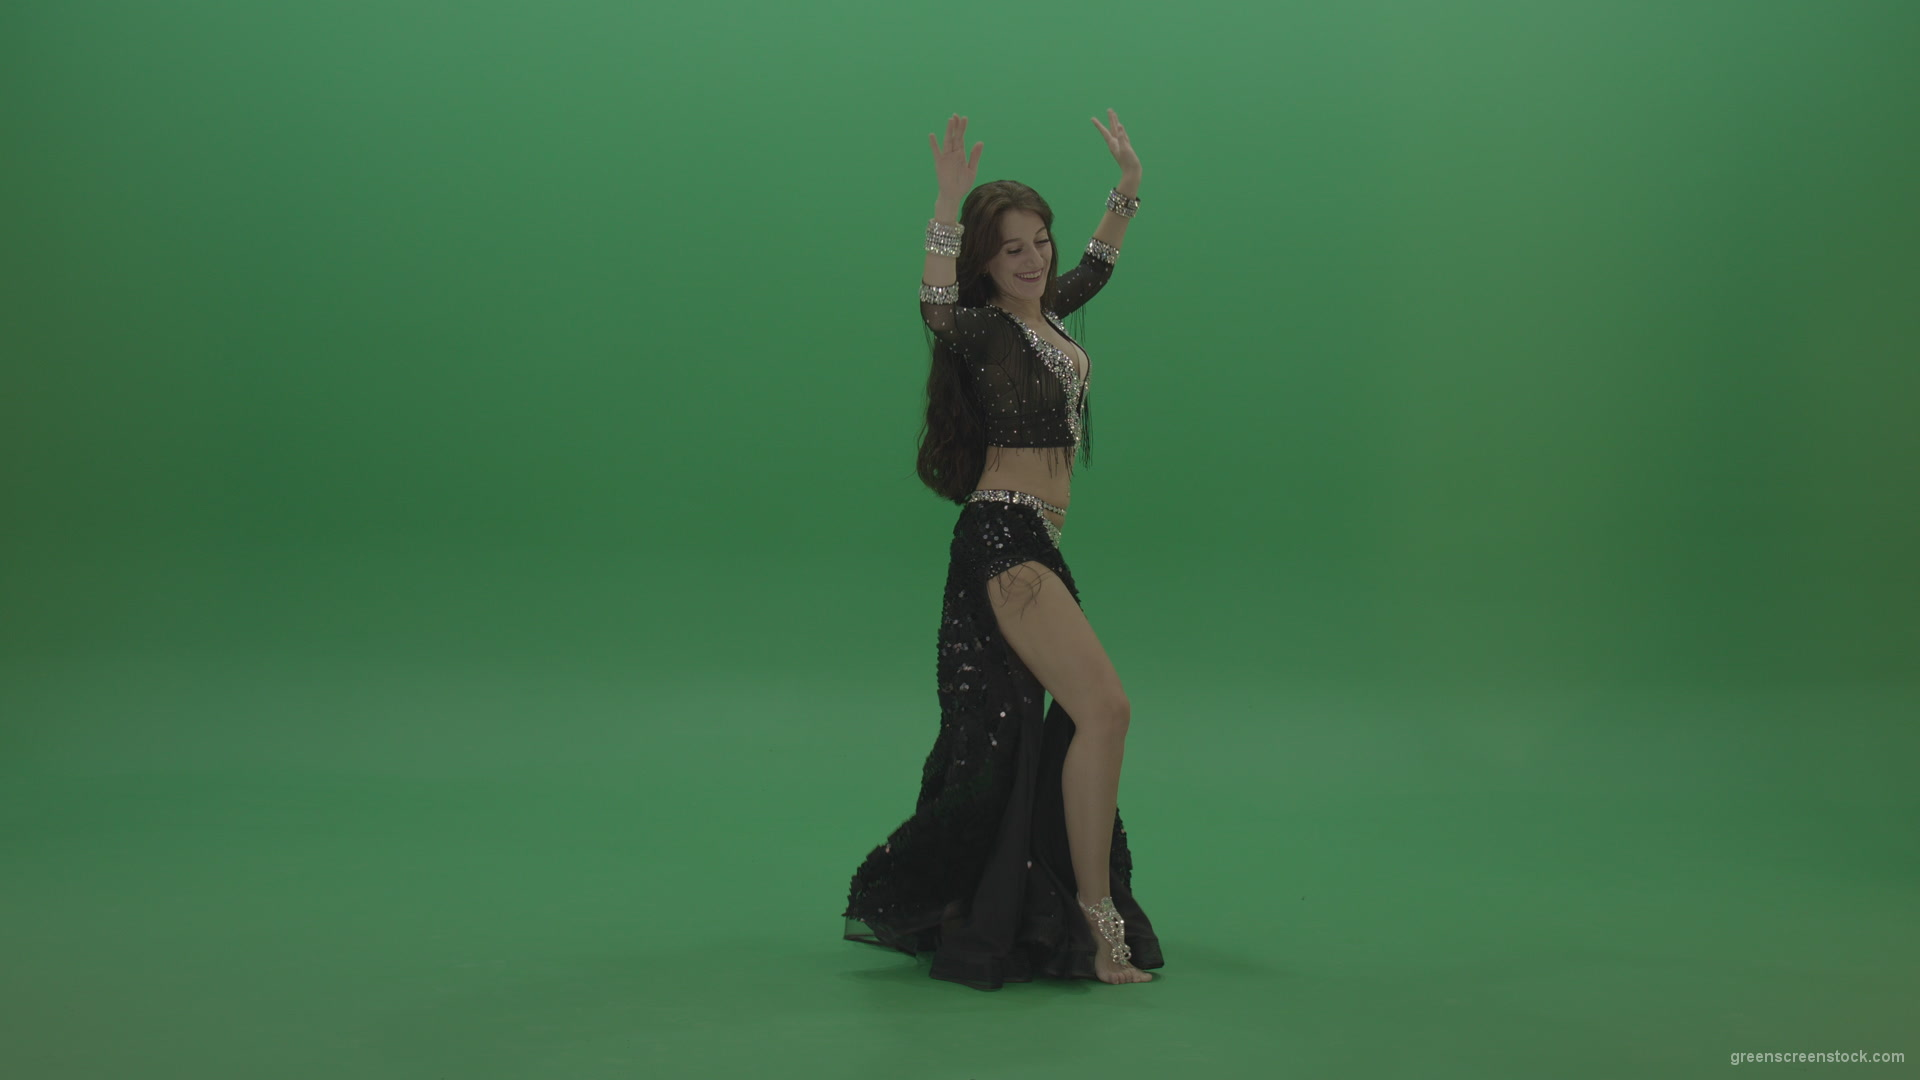 Gorgeous-belly-dancer-in-black-wear-display-amazing-dance-moves-over-chromakey-background_007 Green Screen Stock